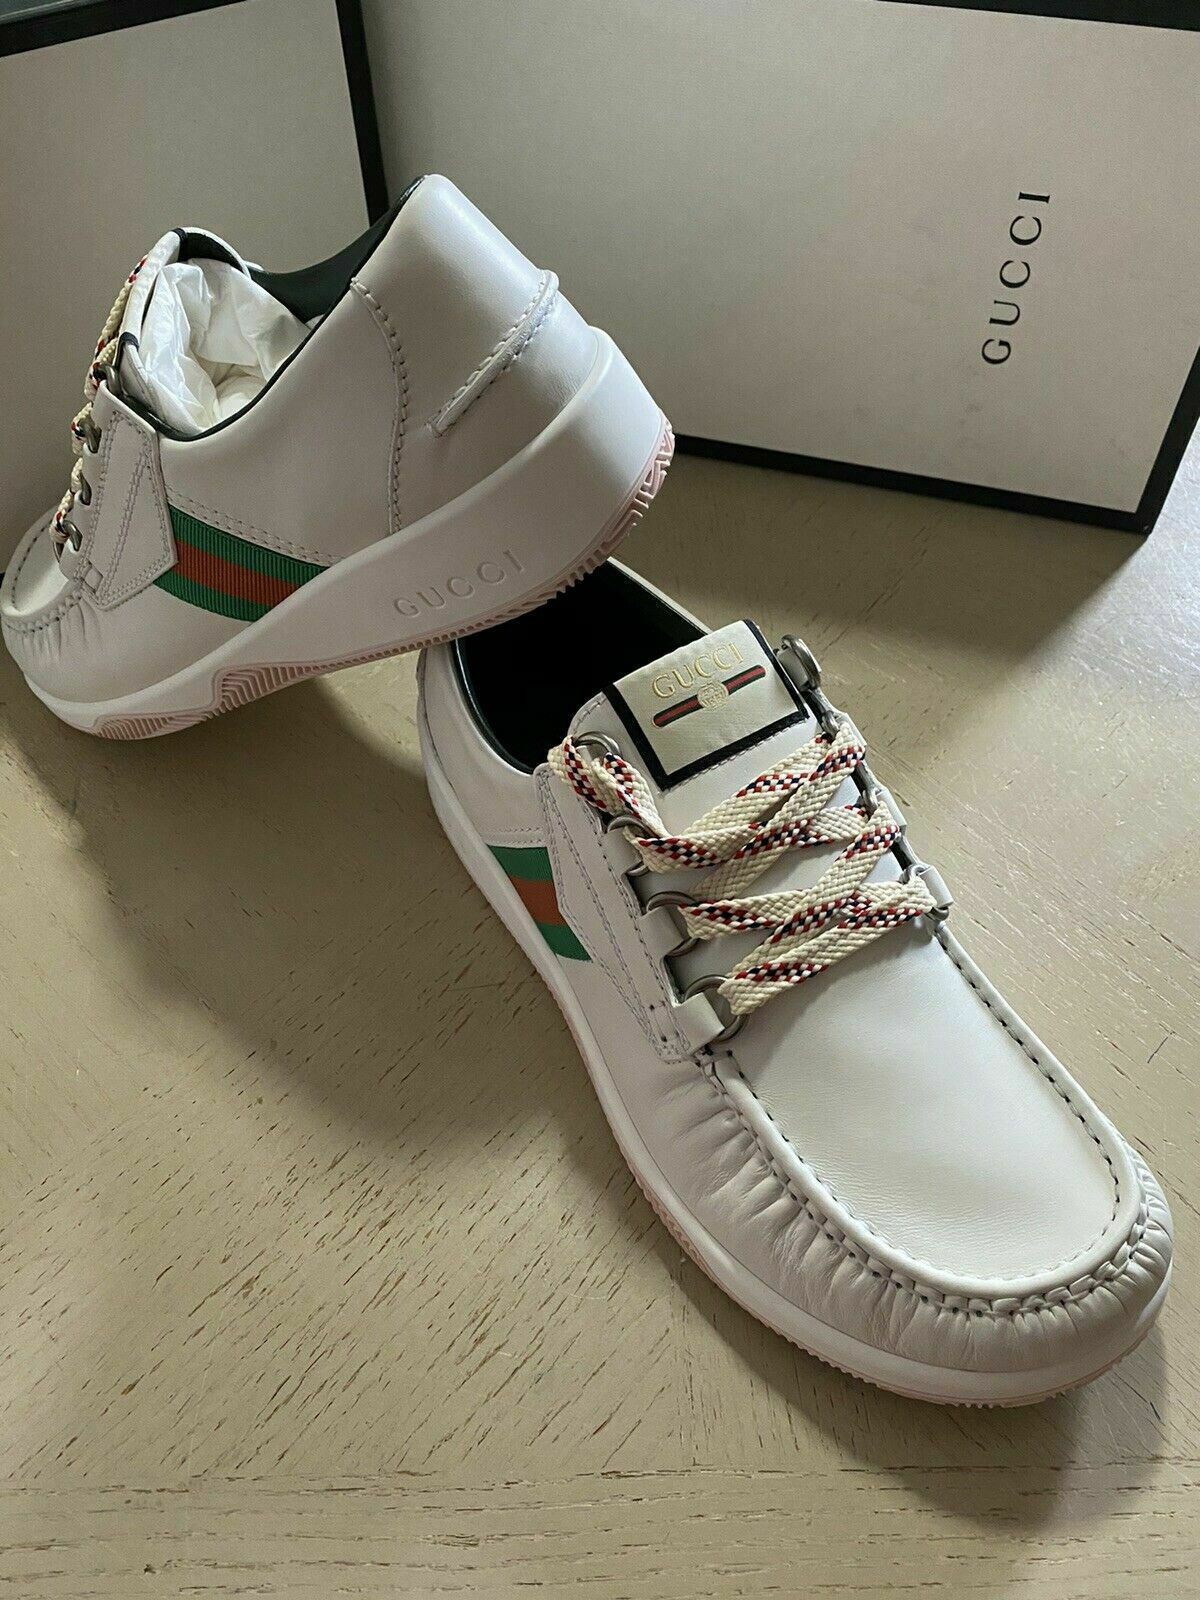 New Gucci Men’s Leather Sneakers Shoes White 9 US ( 8 UK ) Italy 575399